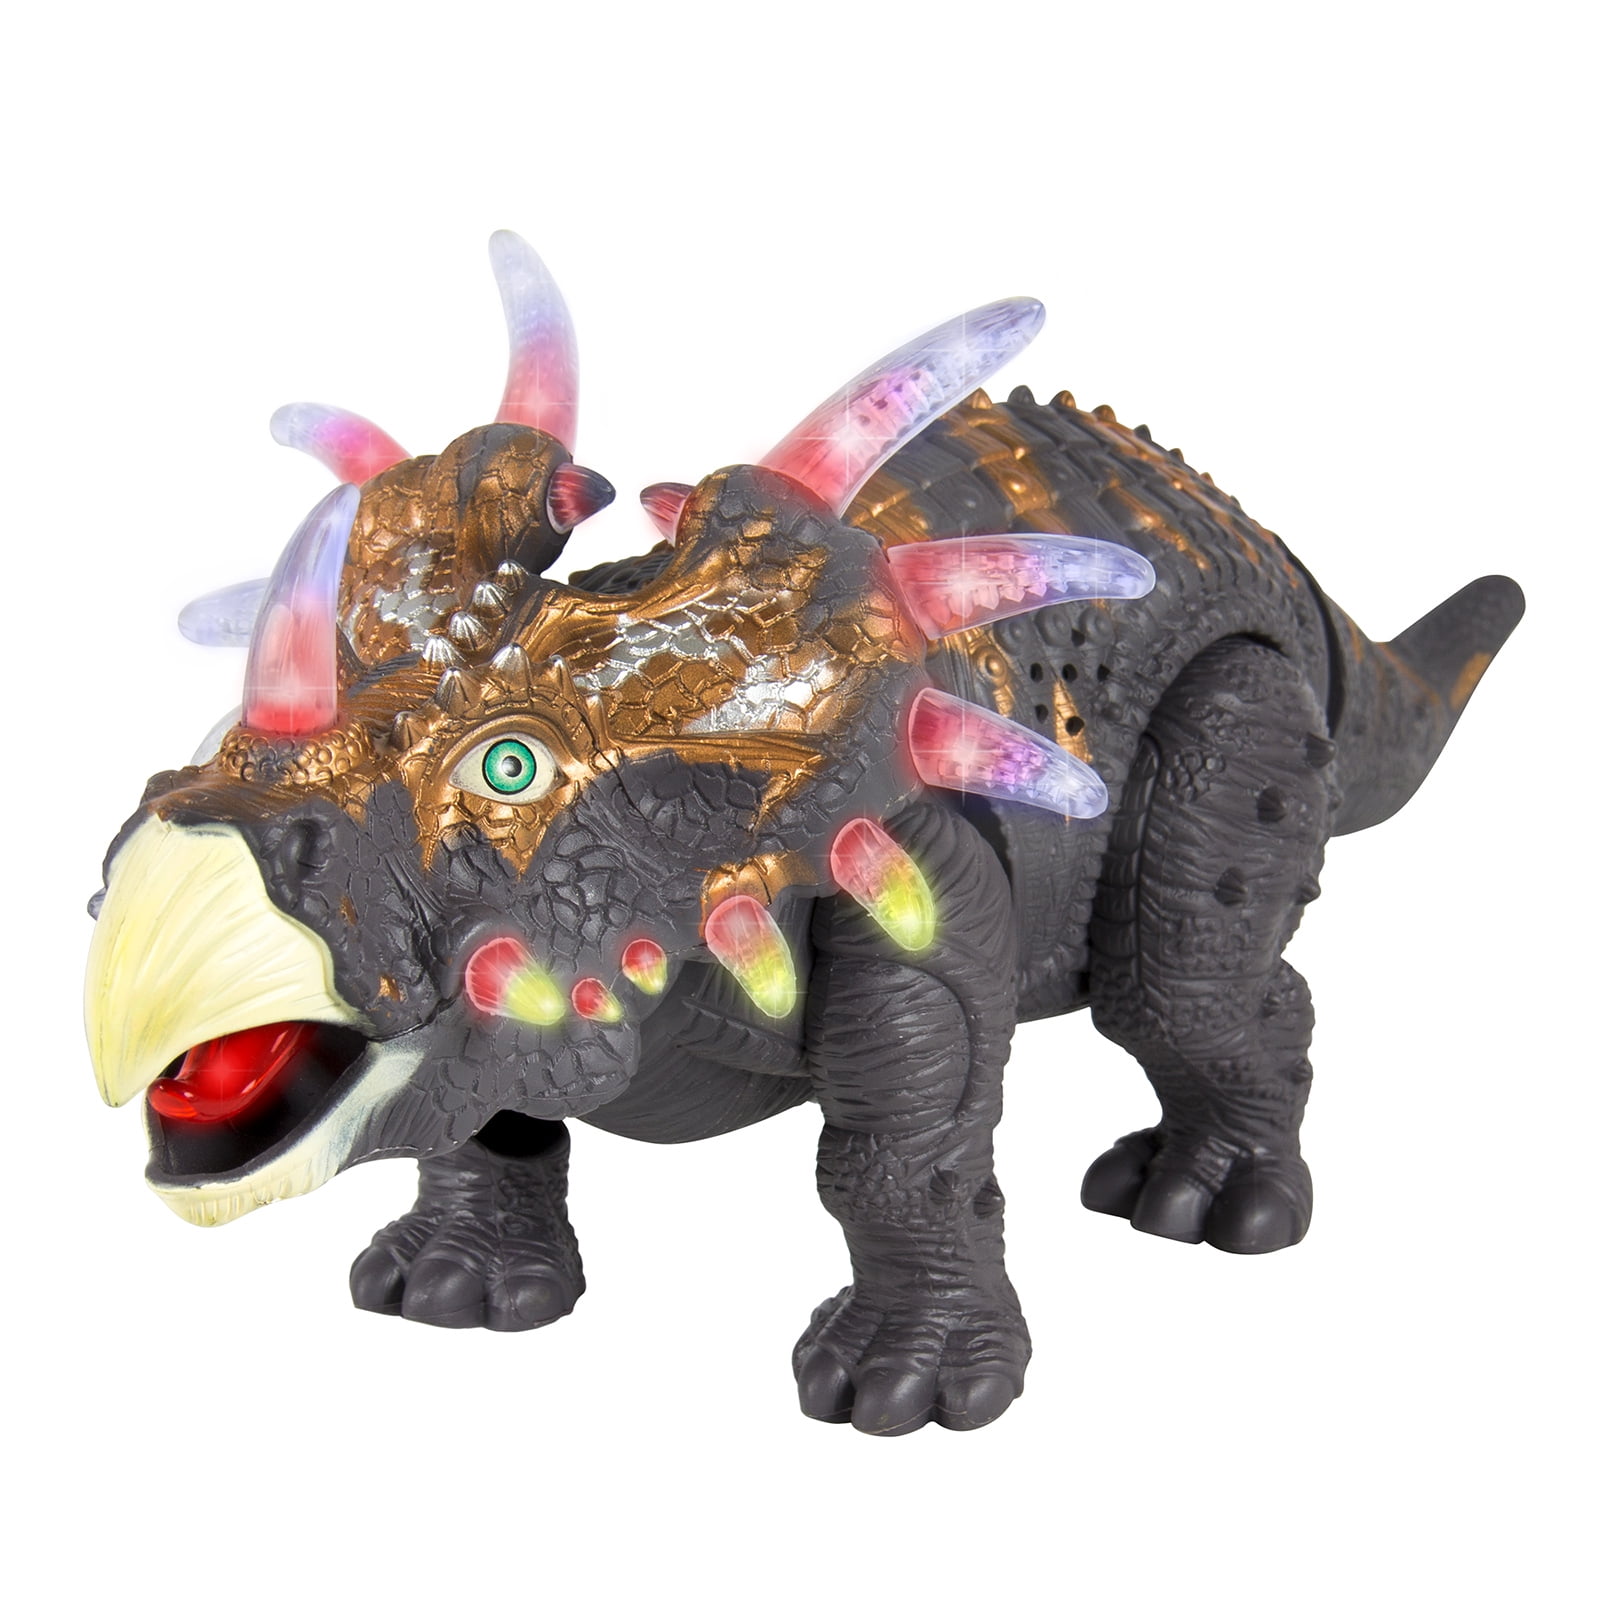 Walking Dinosaur Toy Triceratops Figure with Light Sound for Toddler Kids Gift 